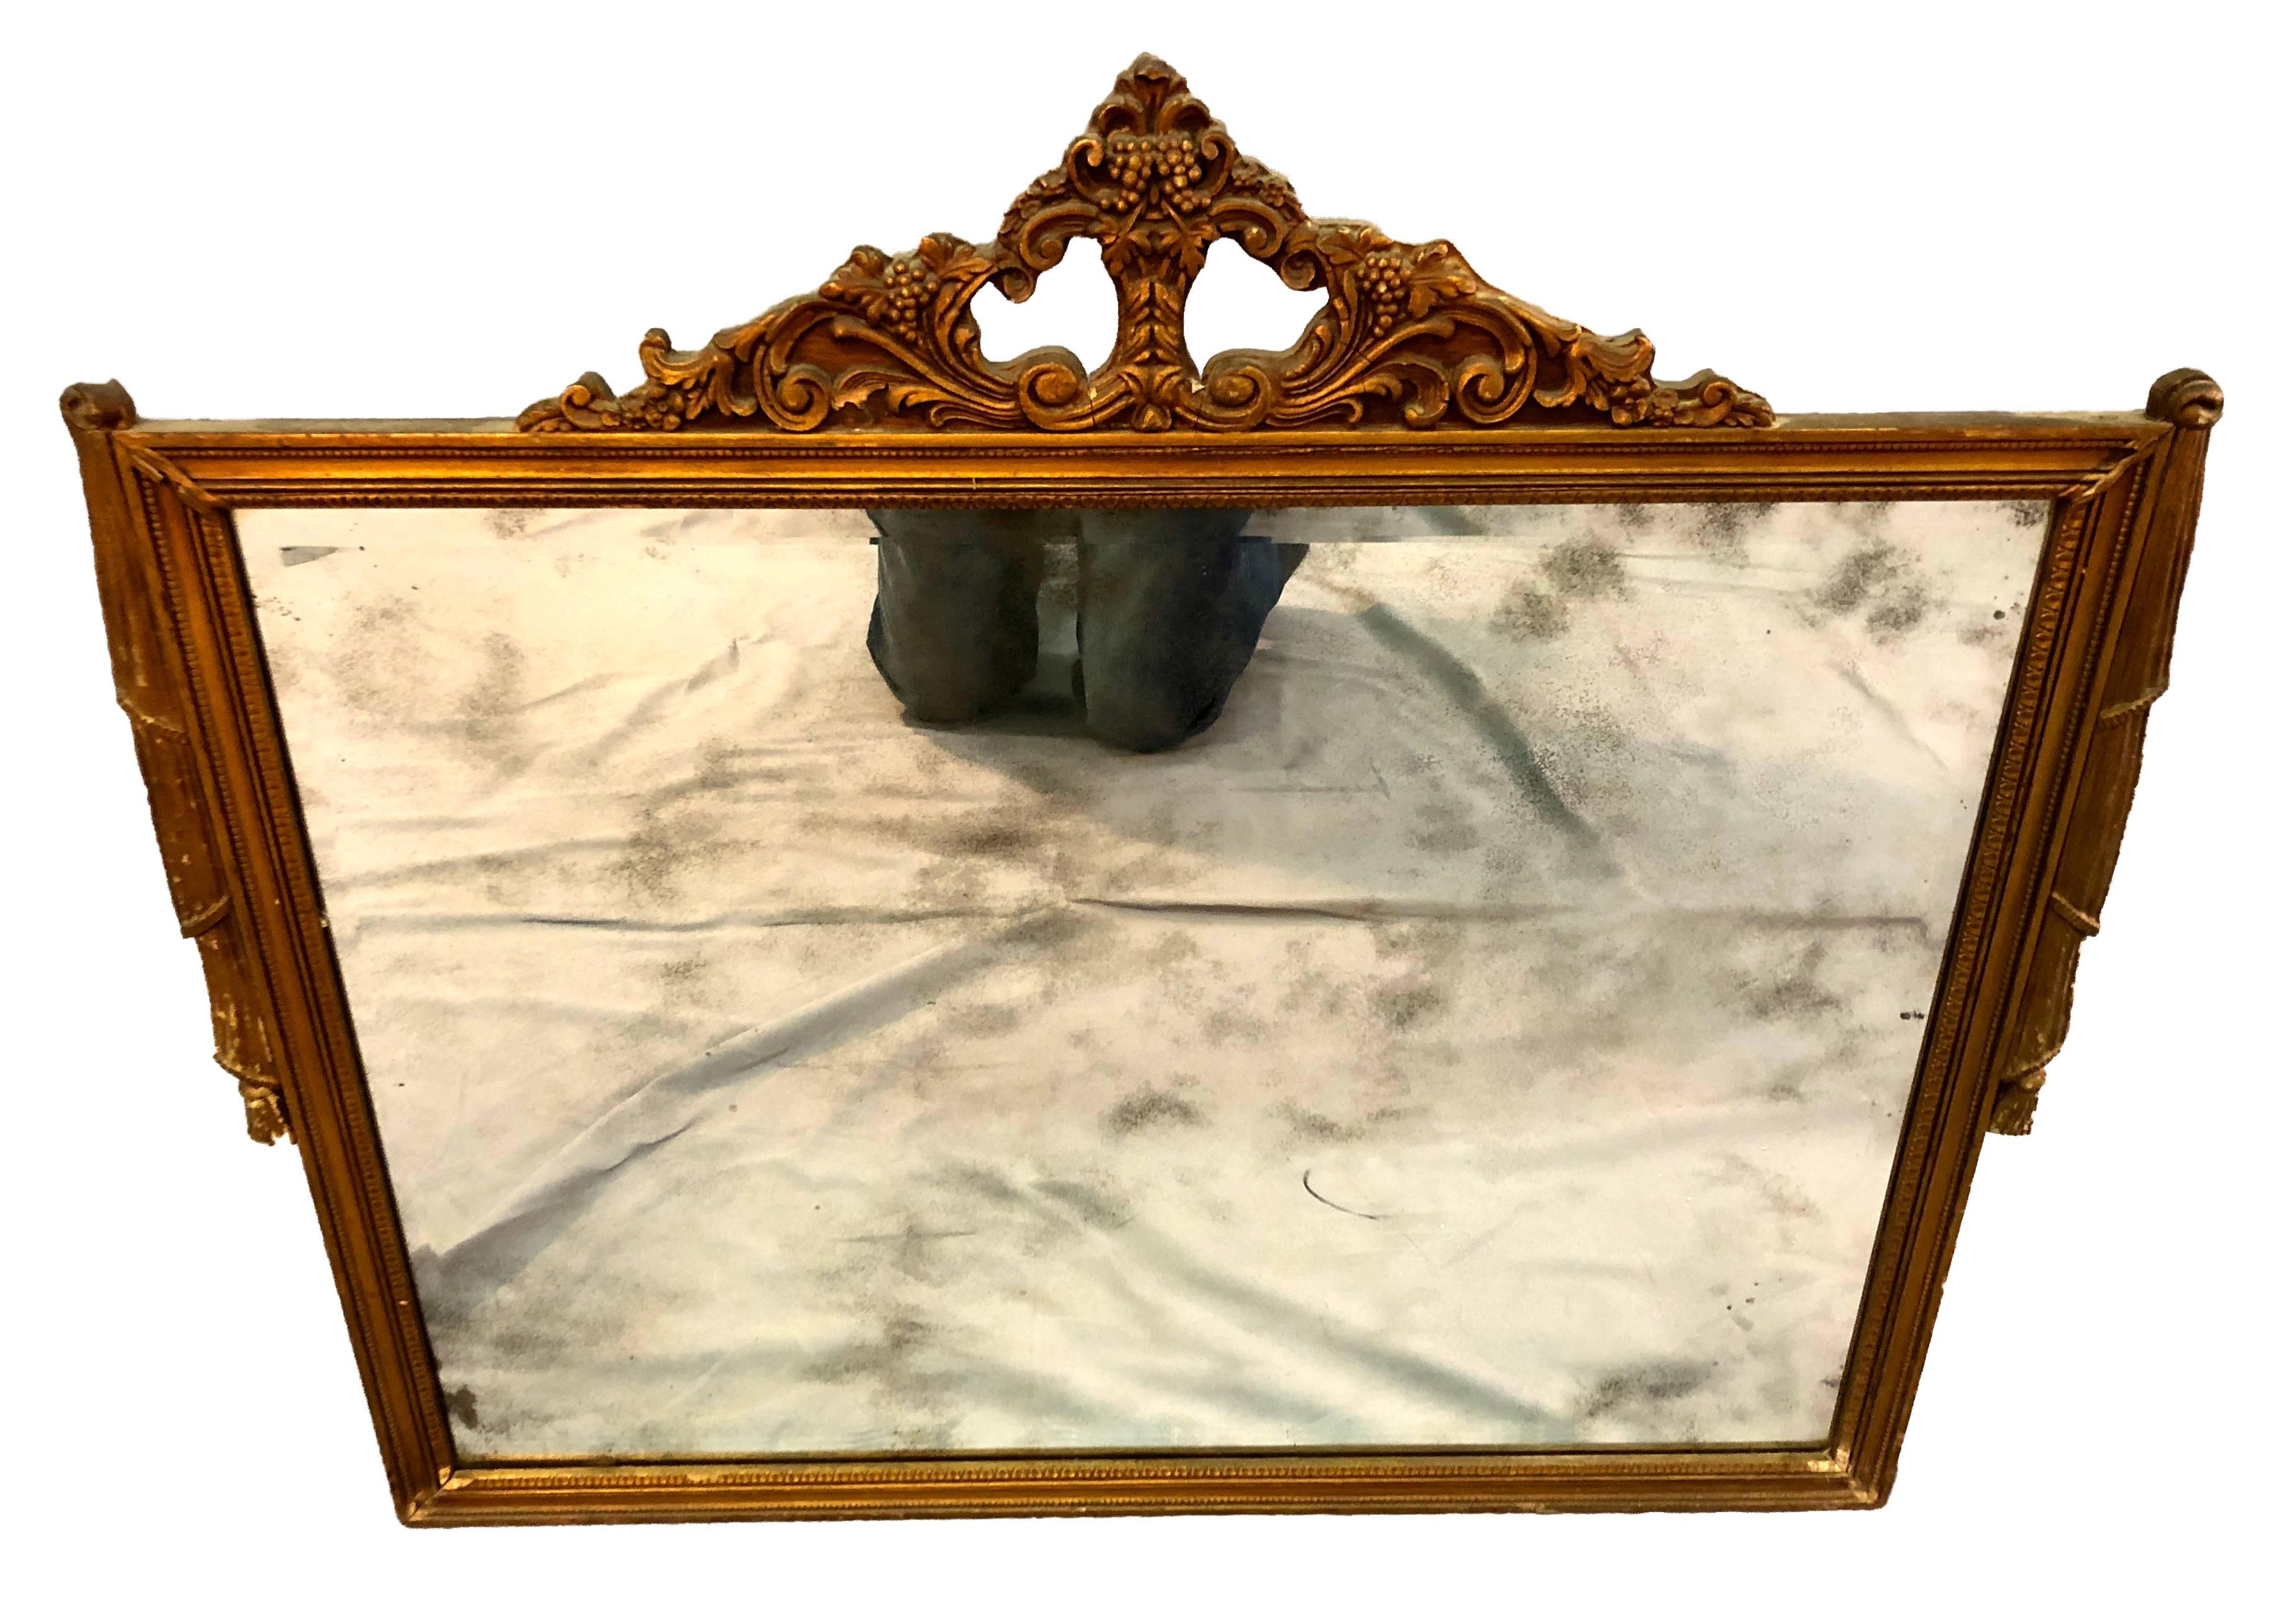 Early 1900s neoclassical gilt painted wood framed mirror. Spots of wear to the paint and age wear to the mirror. Hardware is included.